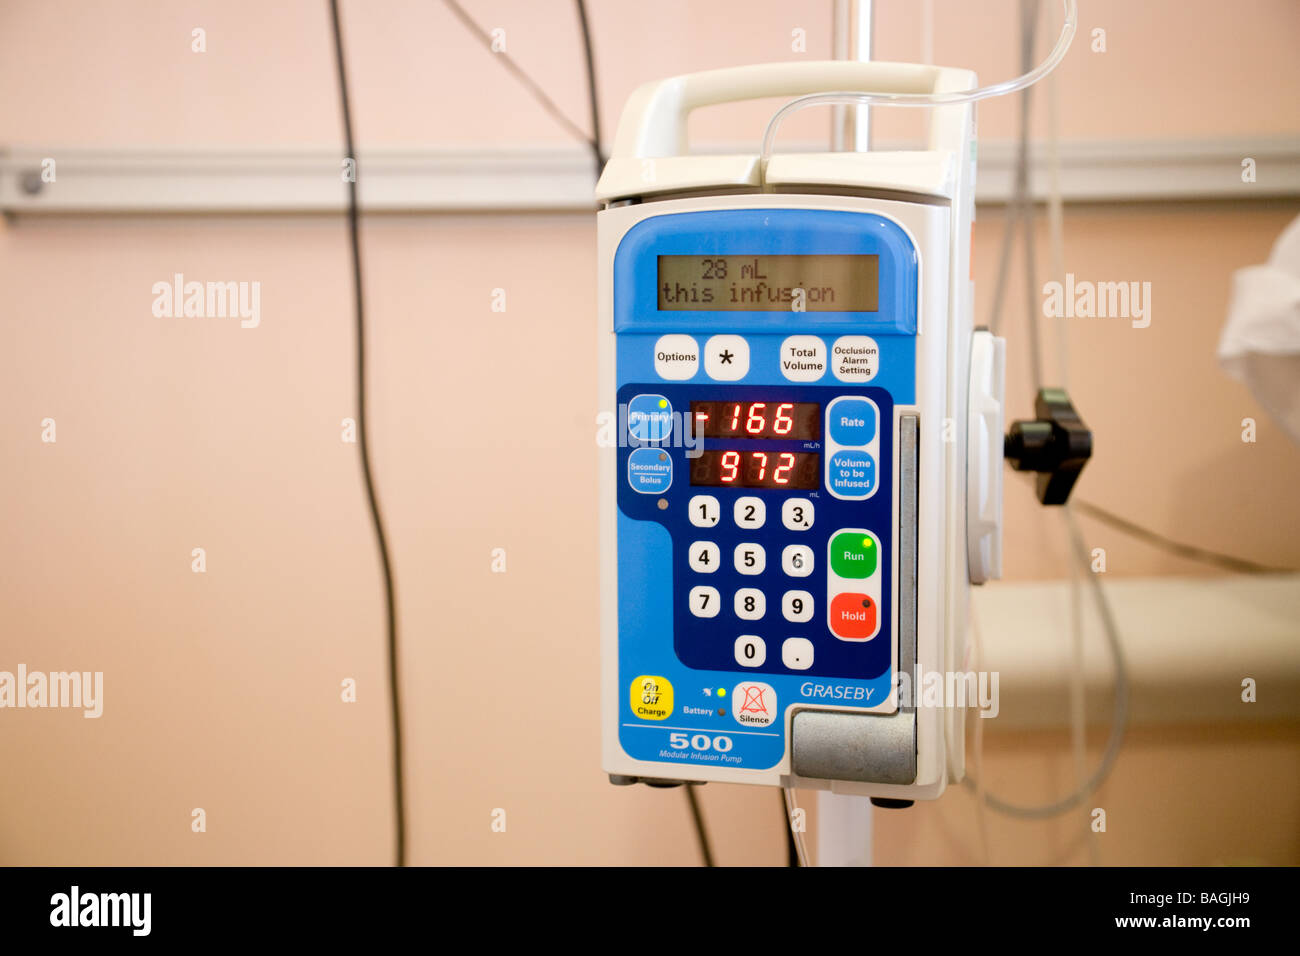 A Graseby Infusion pump for intravenous medication in a hospital in England Stock Photo